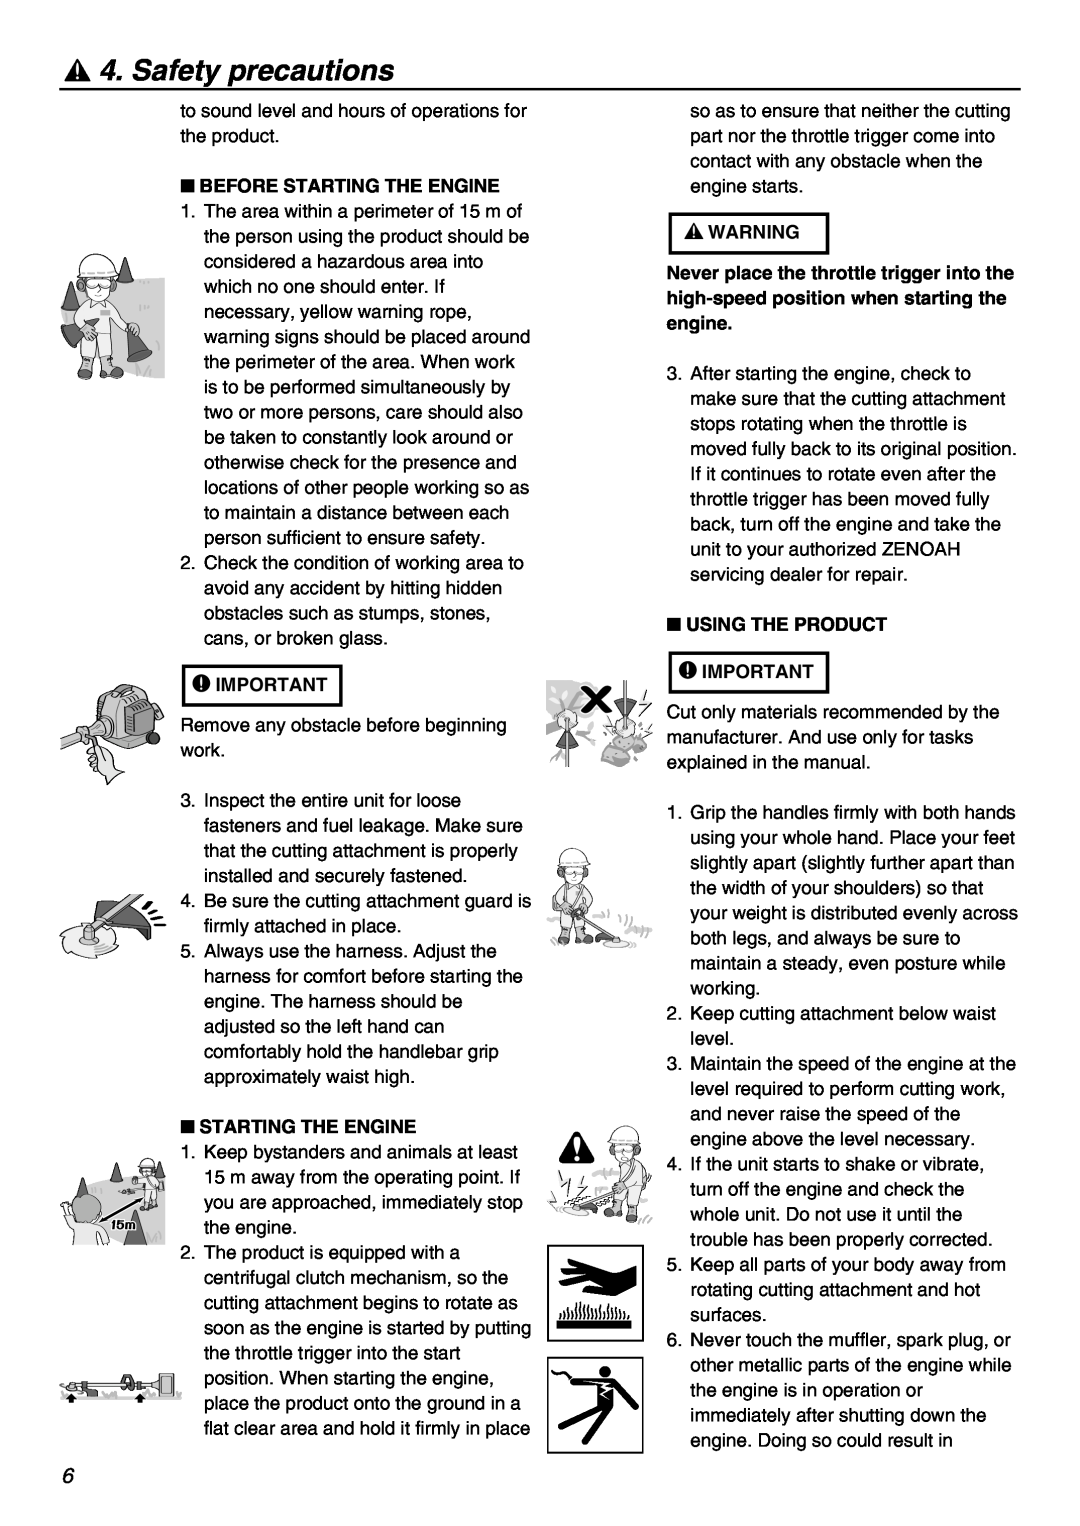 Zenoah KAM-402 owner manual Safety precautions, Before Starting The Engine, Using The Product 